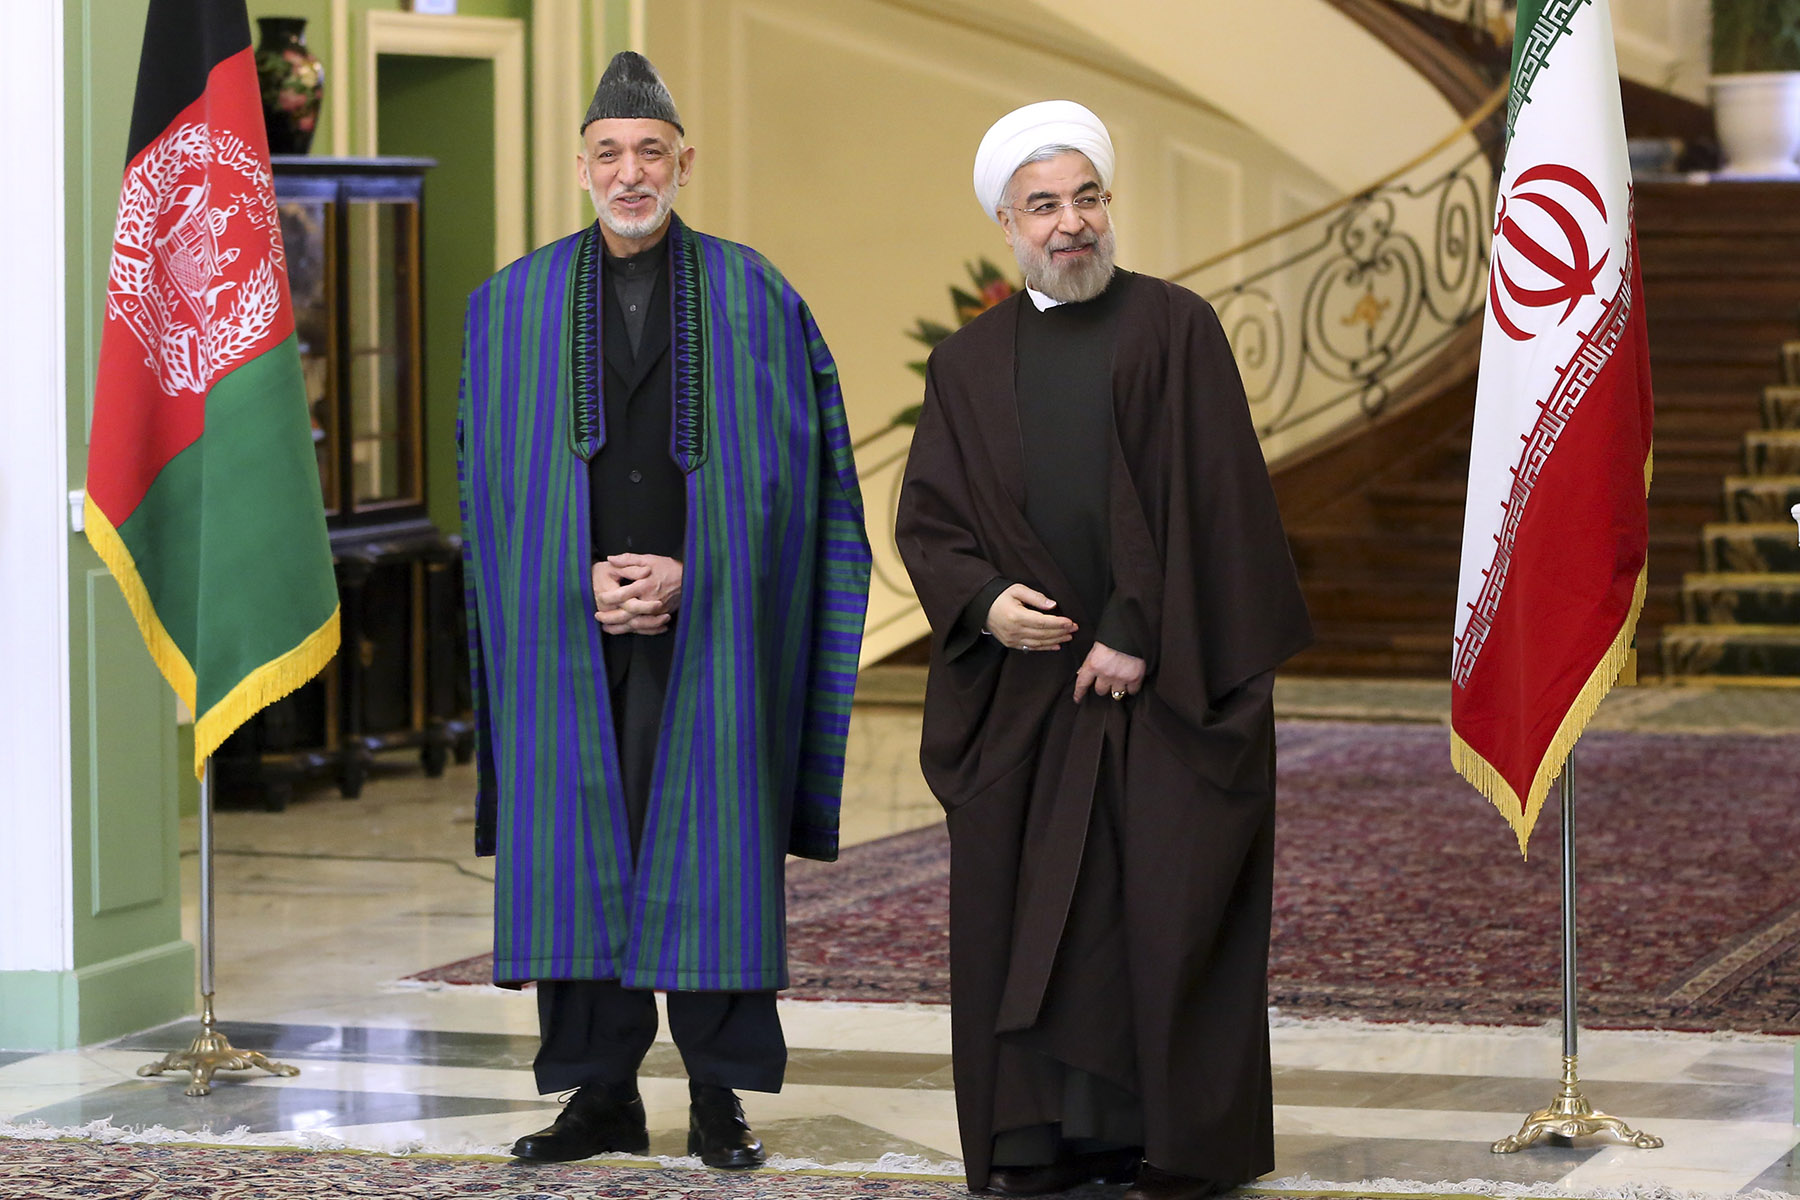 Iran's President Hassan Rouhani, right, stands with Afghan President Hamid Karzai, Sunday, Dec. 8, 2013. On Karzai’s watch, the Afghan economy has grown rapidly, at an average rate of 9.2% from 2003 to 2012. But only 27% of Afghans have access to safe drinking water, and 5% to adequate sanitation. (Ebrahim Noroozi / AP)